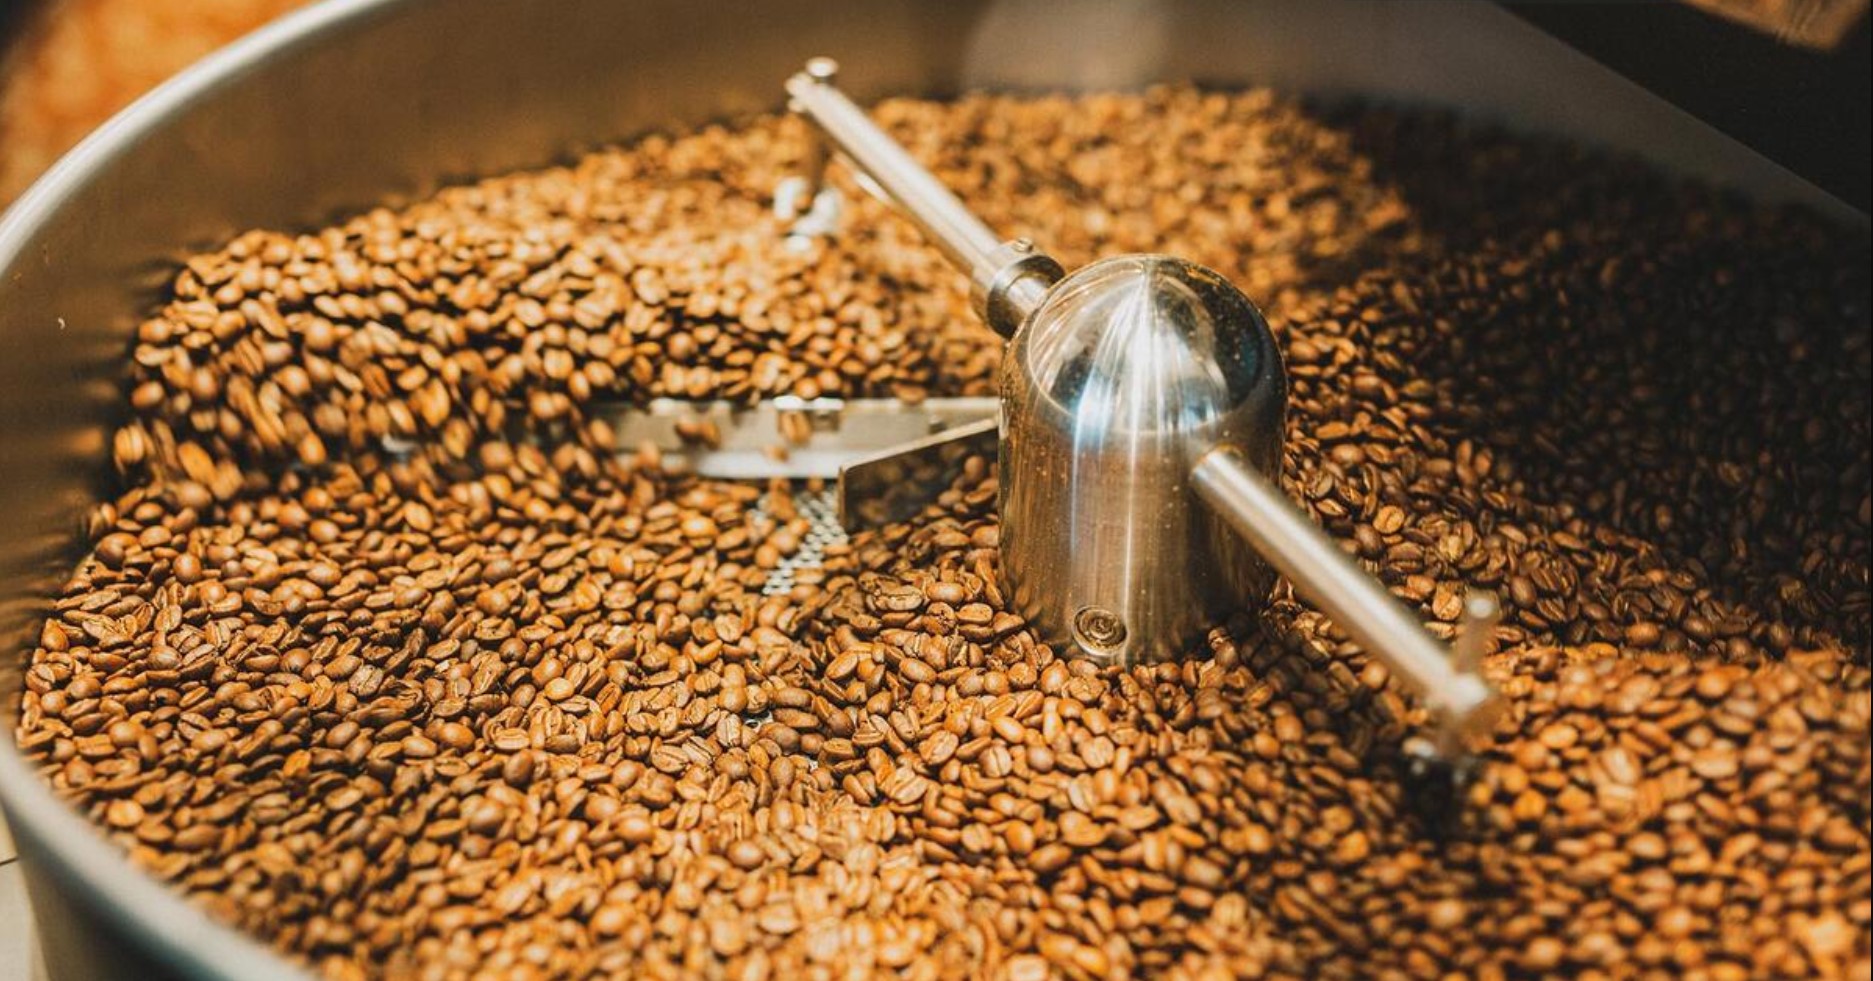 The Art and Science of Roasting: What Happens to Coffee Beans?